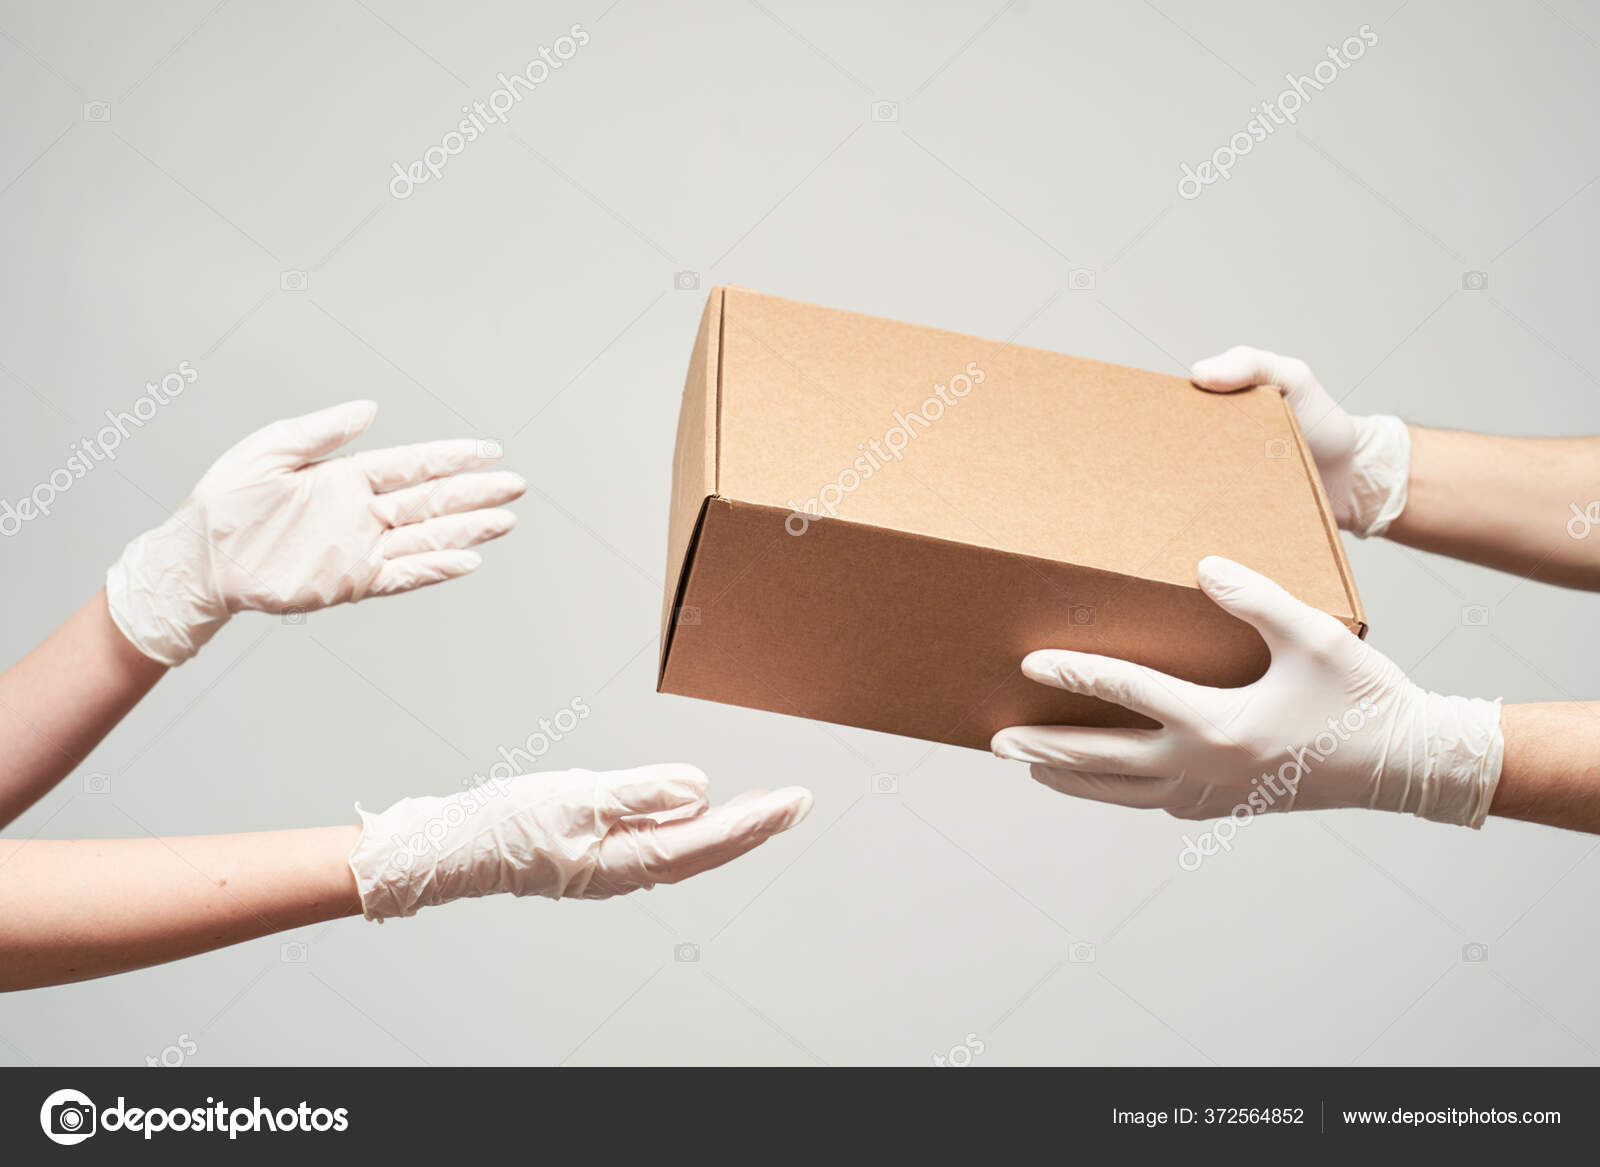 Premium Photo  Young delivery man in medical gloves and